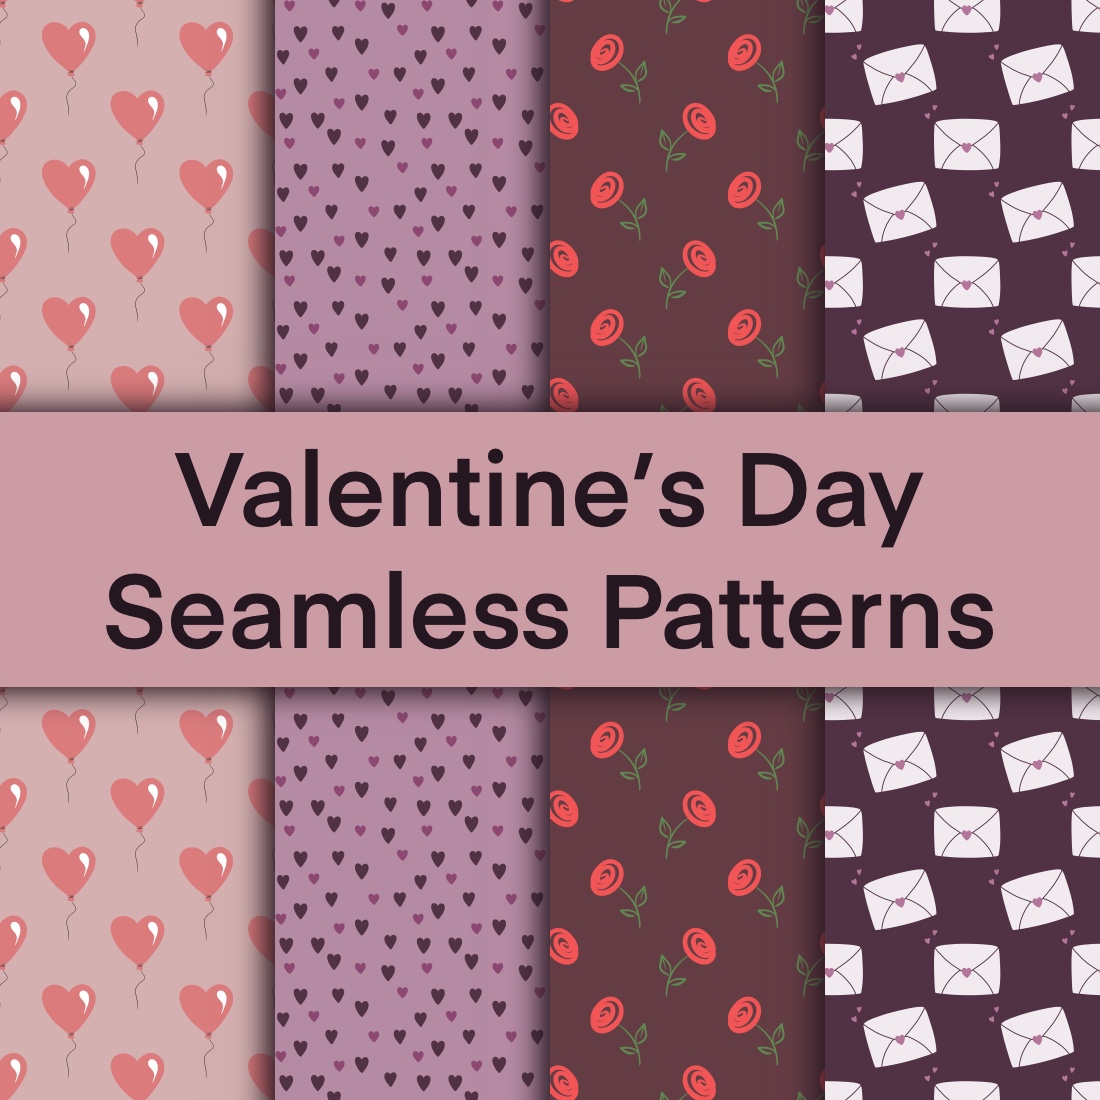 Valentine’s Day Seamless Patterns preview.